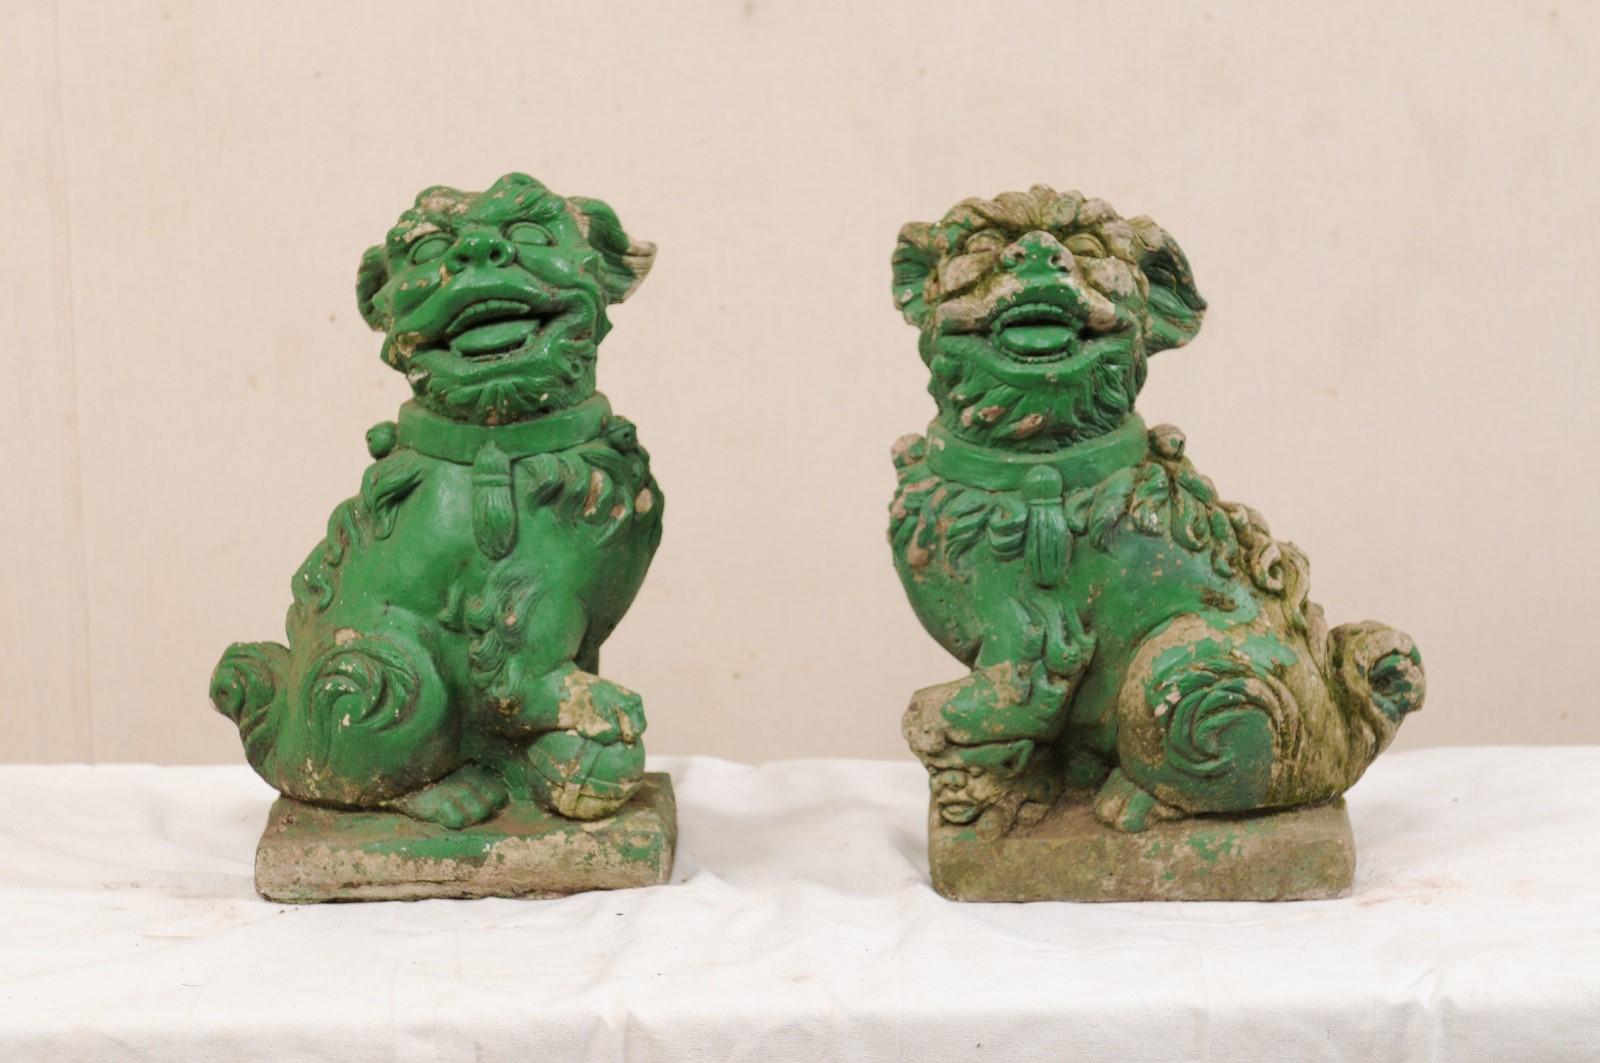 A European pair of Foo Dogs from the mid-20th century. This vintage pair of guardian lions from Europe, created of cast-stone, feature each dog in side-sitting position with expressive faces reflected in their open mouths with teeth and tongue